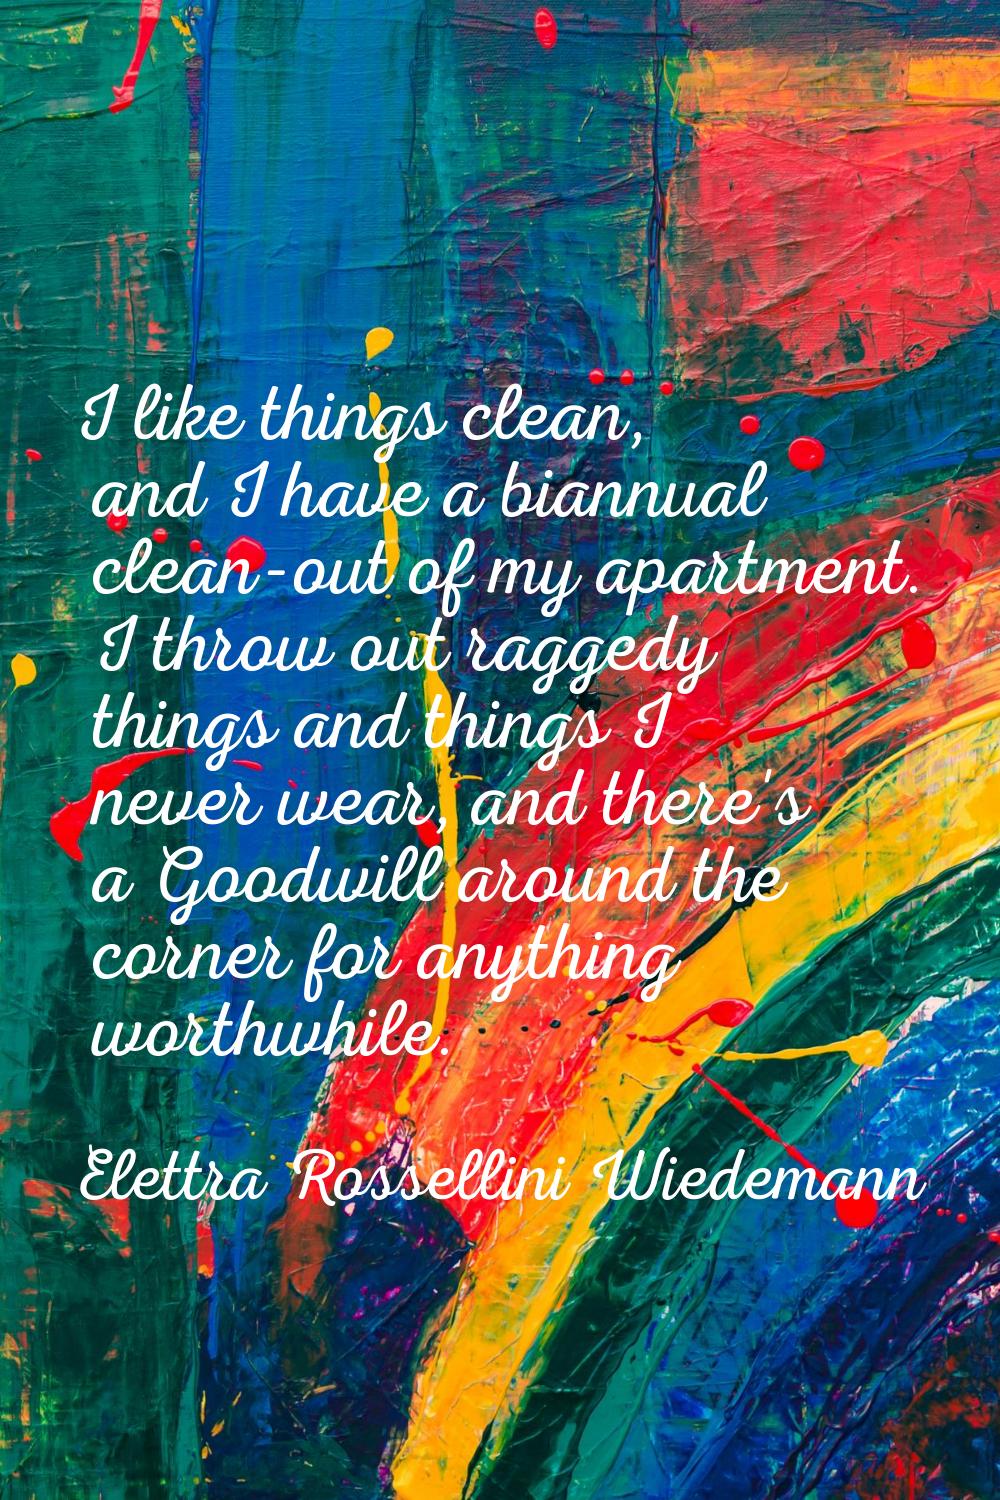 I like things clean, and I have a biannual clean-out of my apartment. I throw out raggedy things an